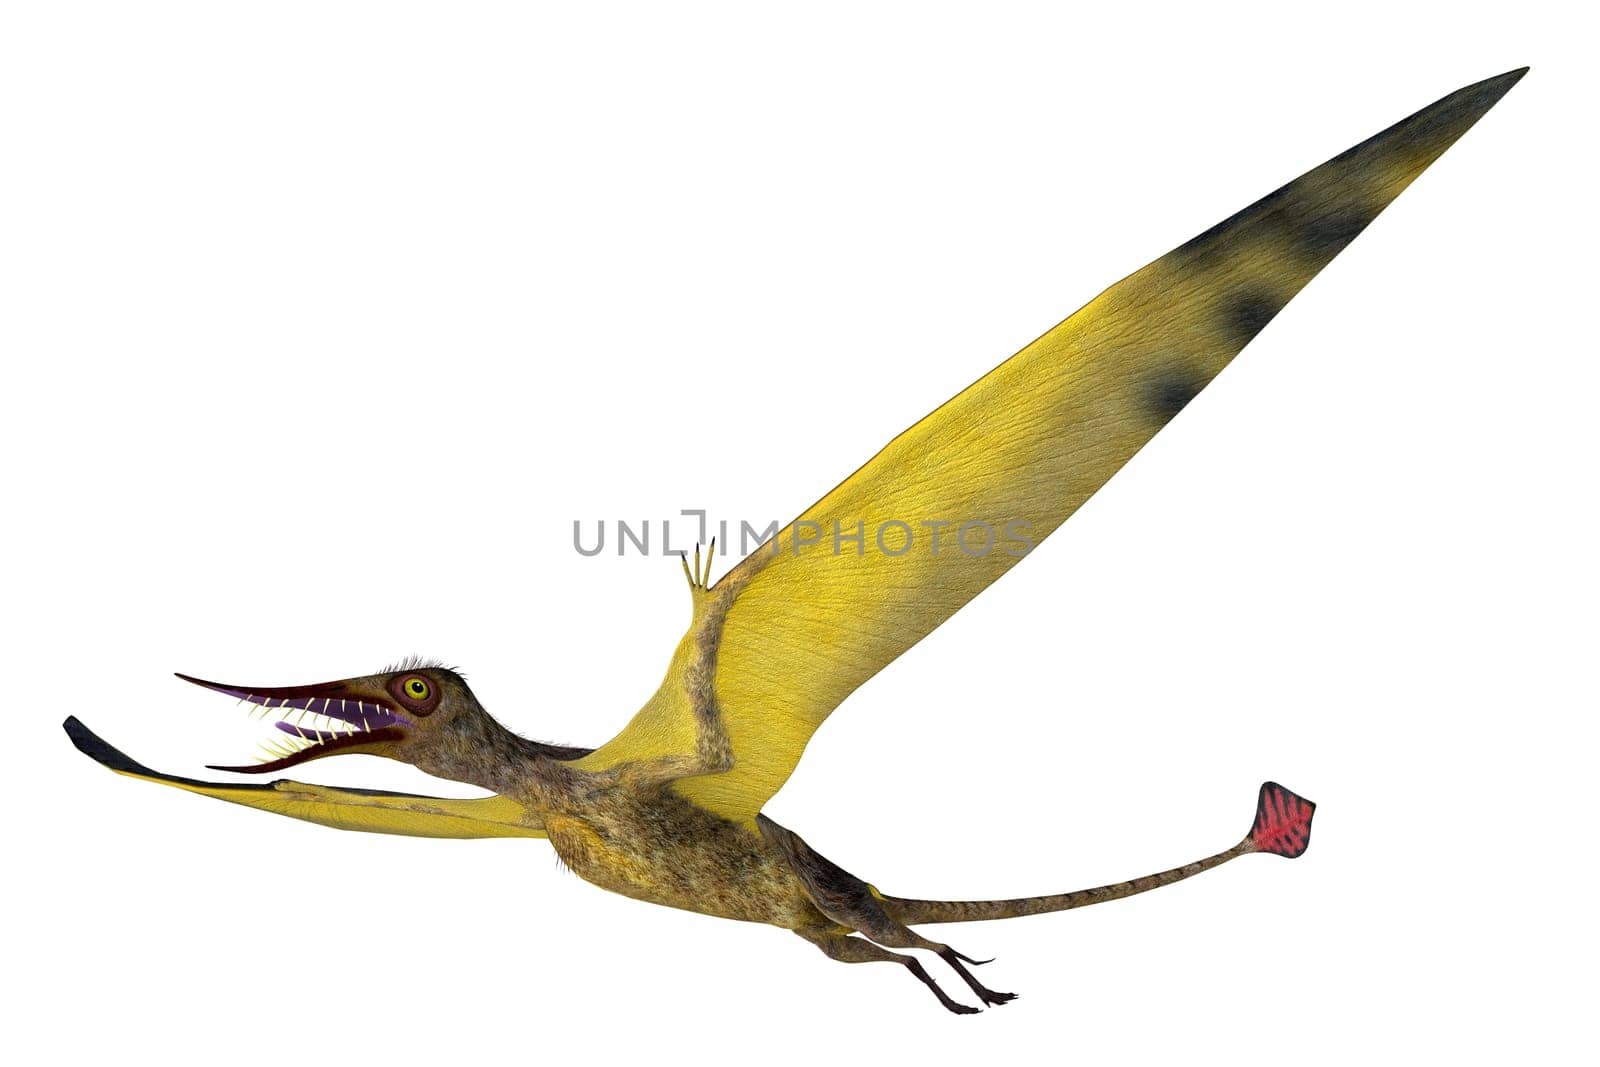 Rhamphorhynchus was a carnivorous predatory bird that lived in Europe during the Jurassic Period.